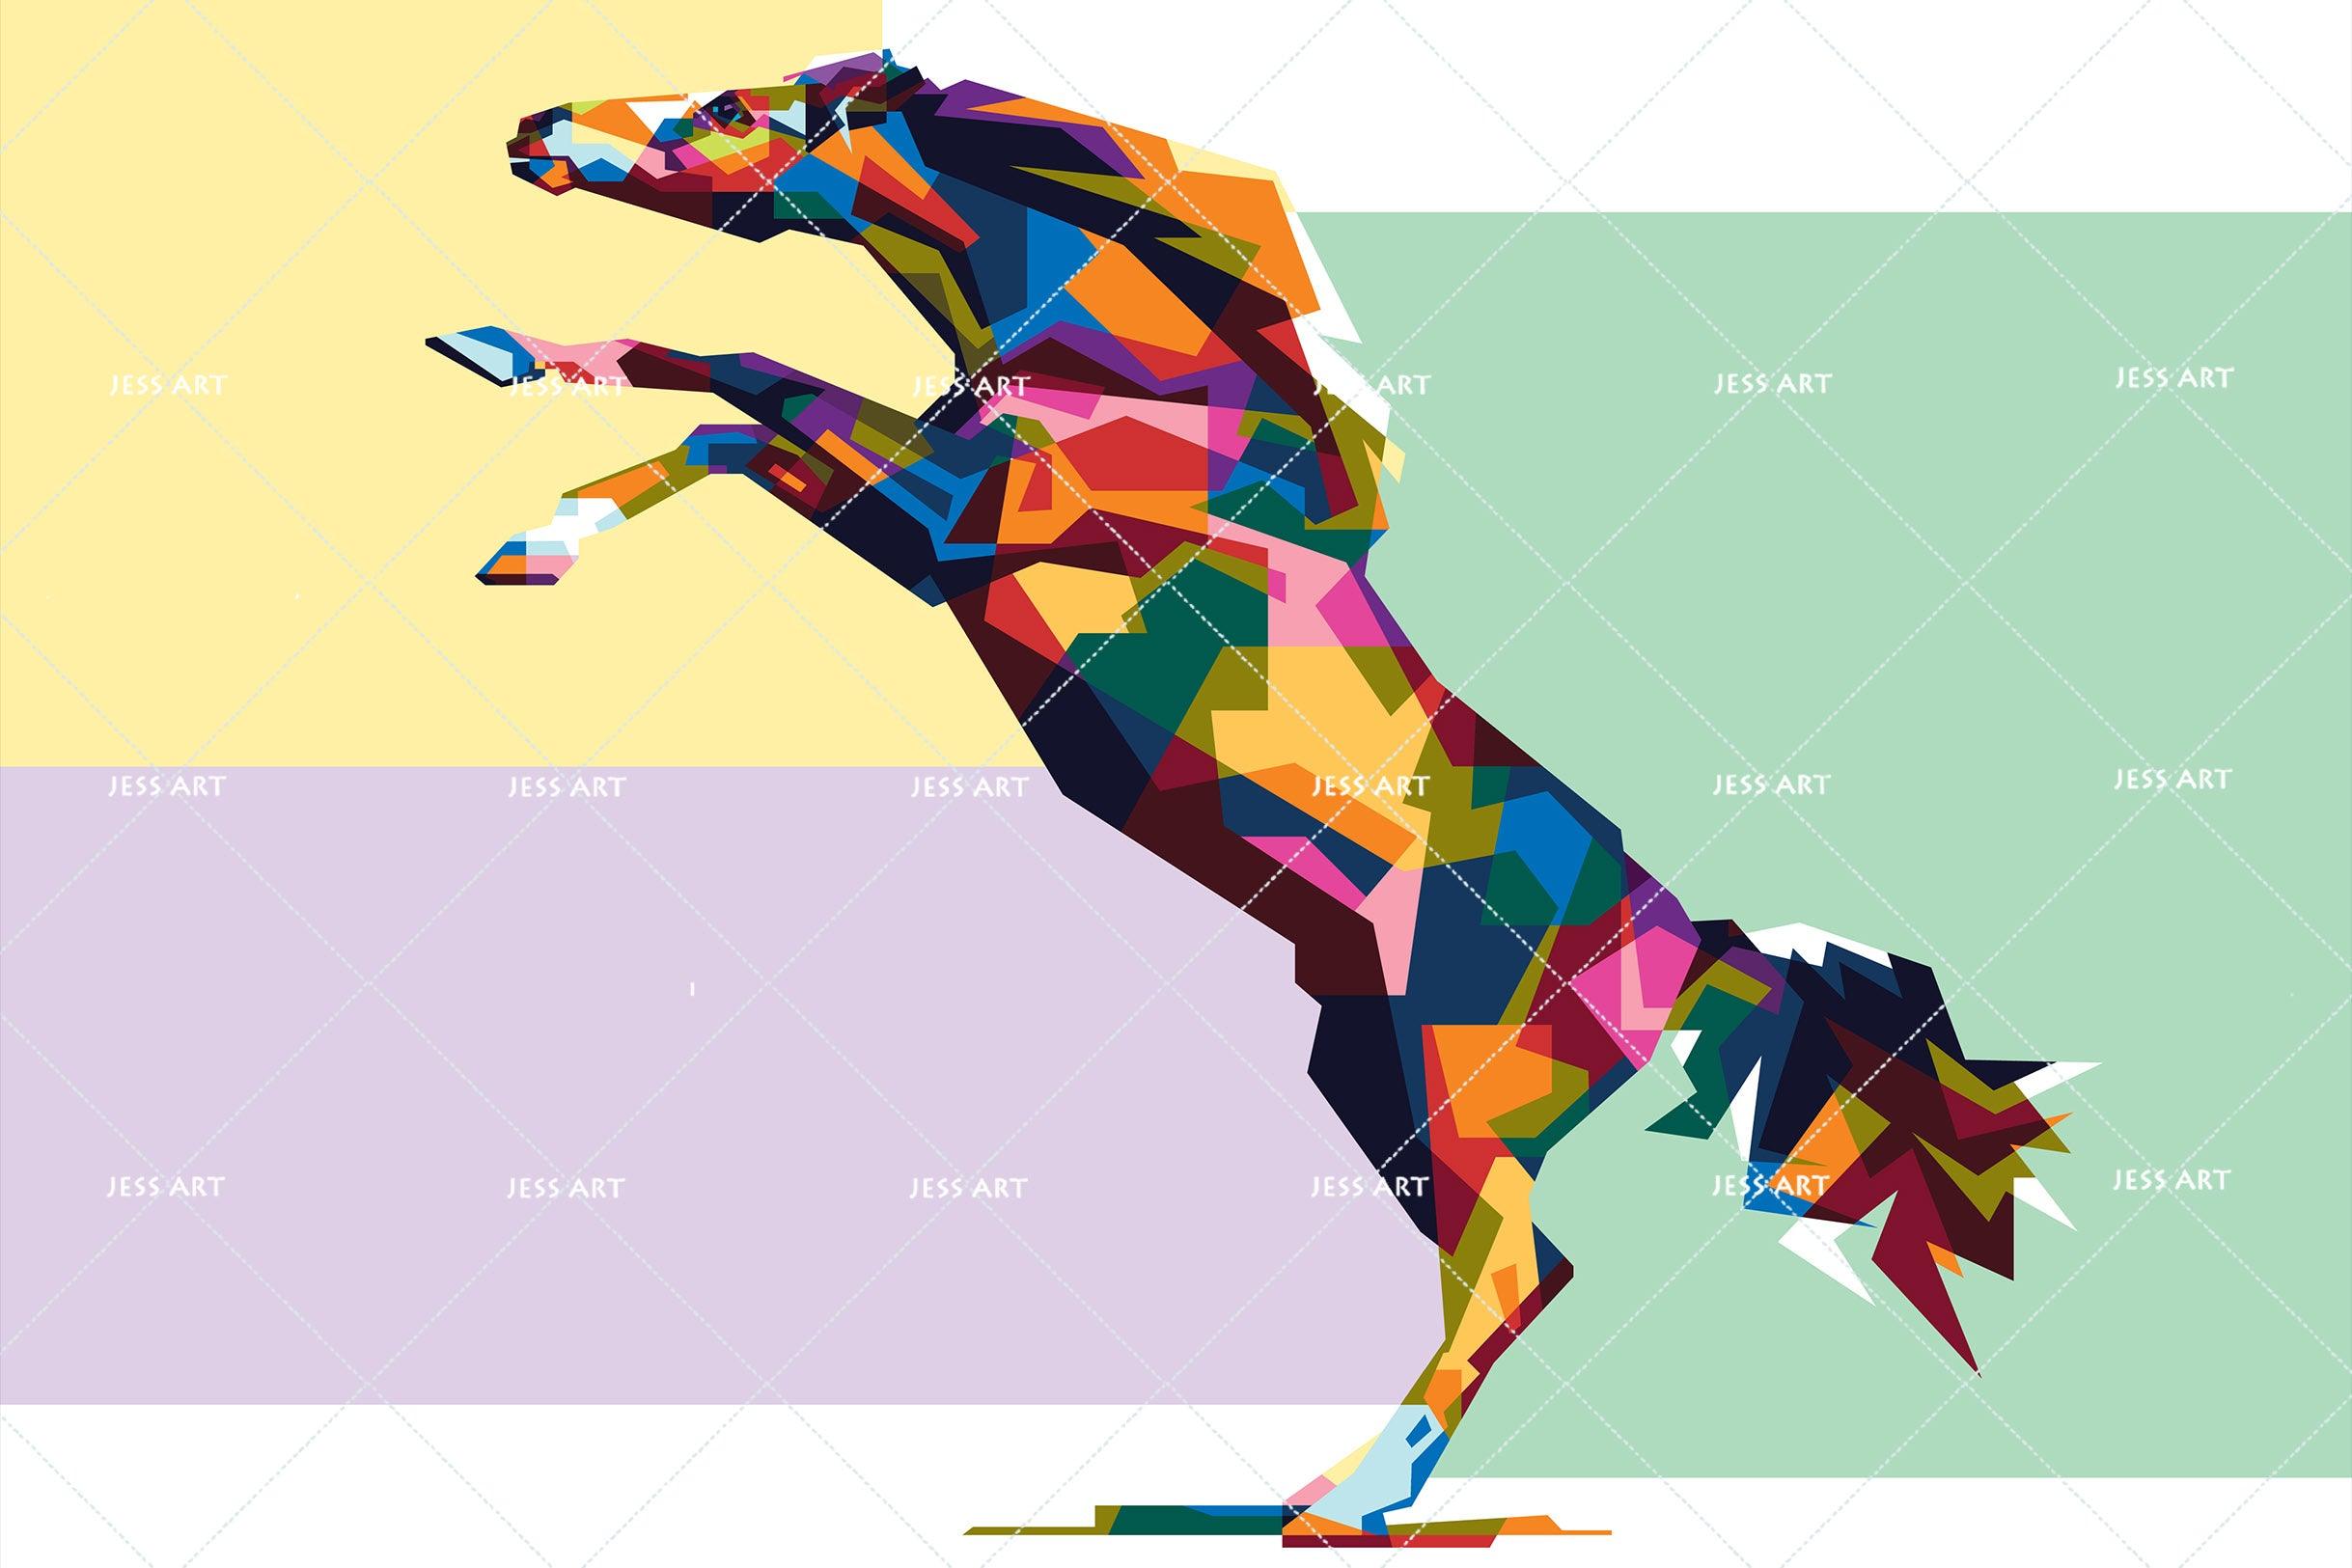 3D Abstract Colorful Horse Wall Mural Wallpaper 11 LQH- Jess Art Decoration